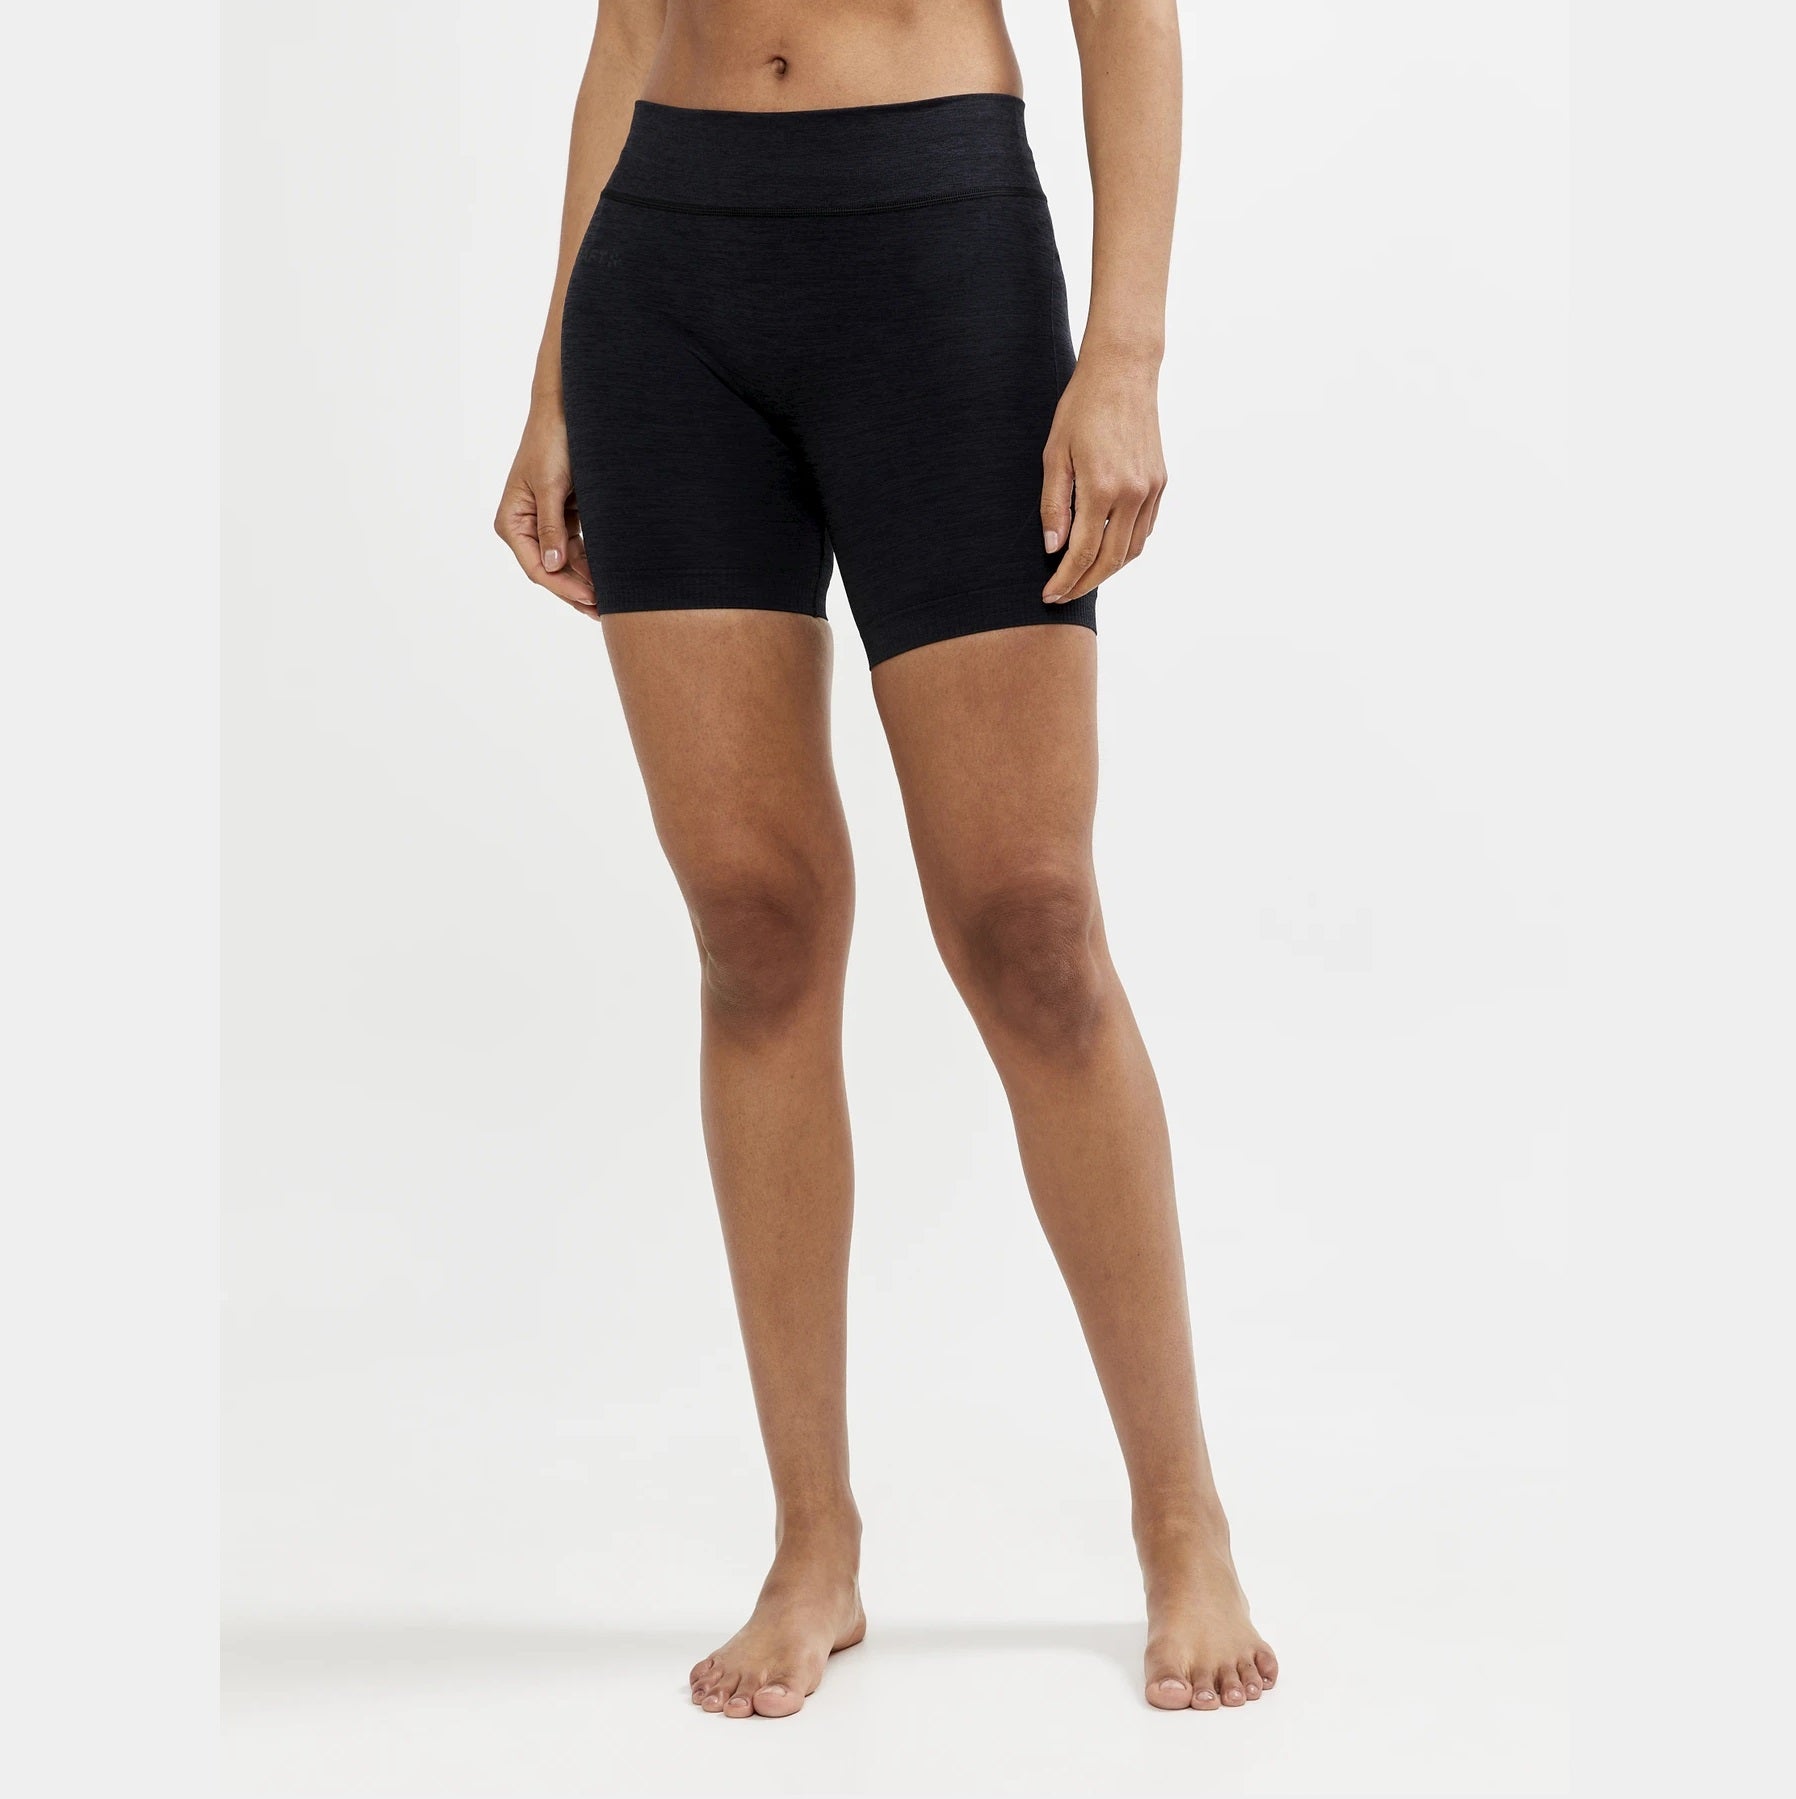 Soft womens boxer briefs For Comfort 